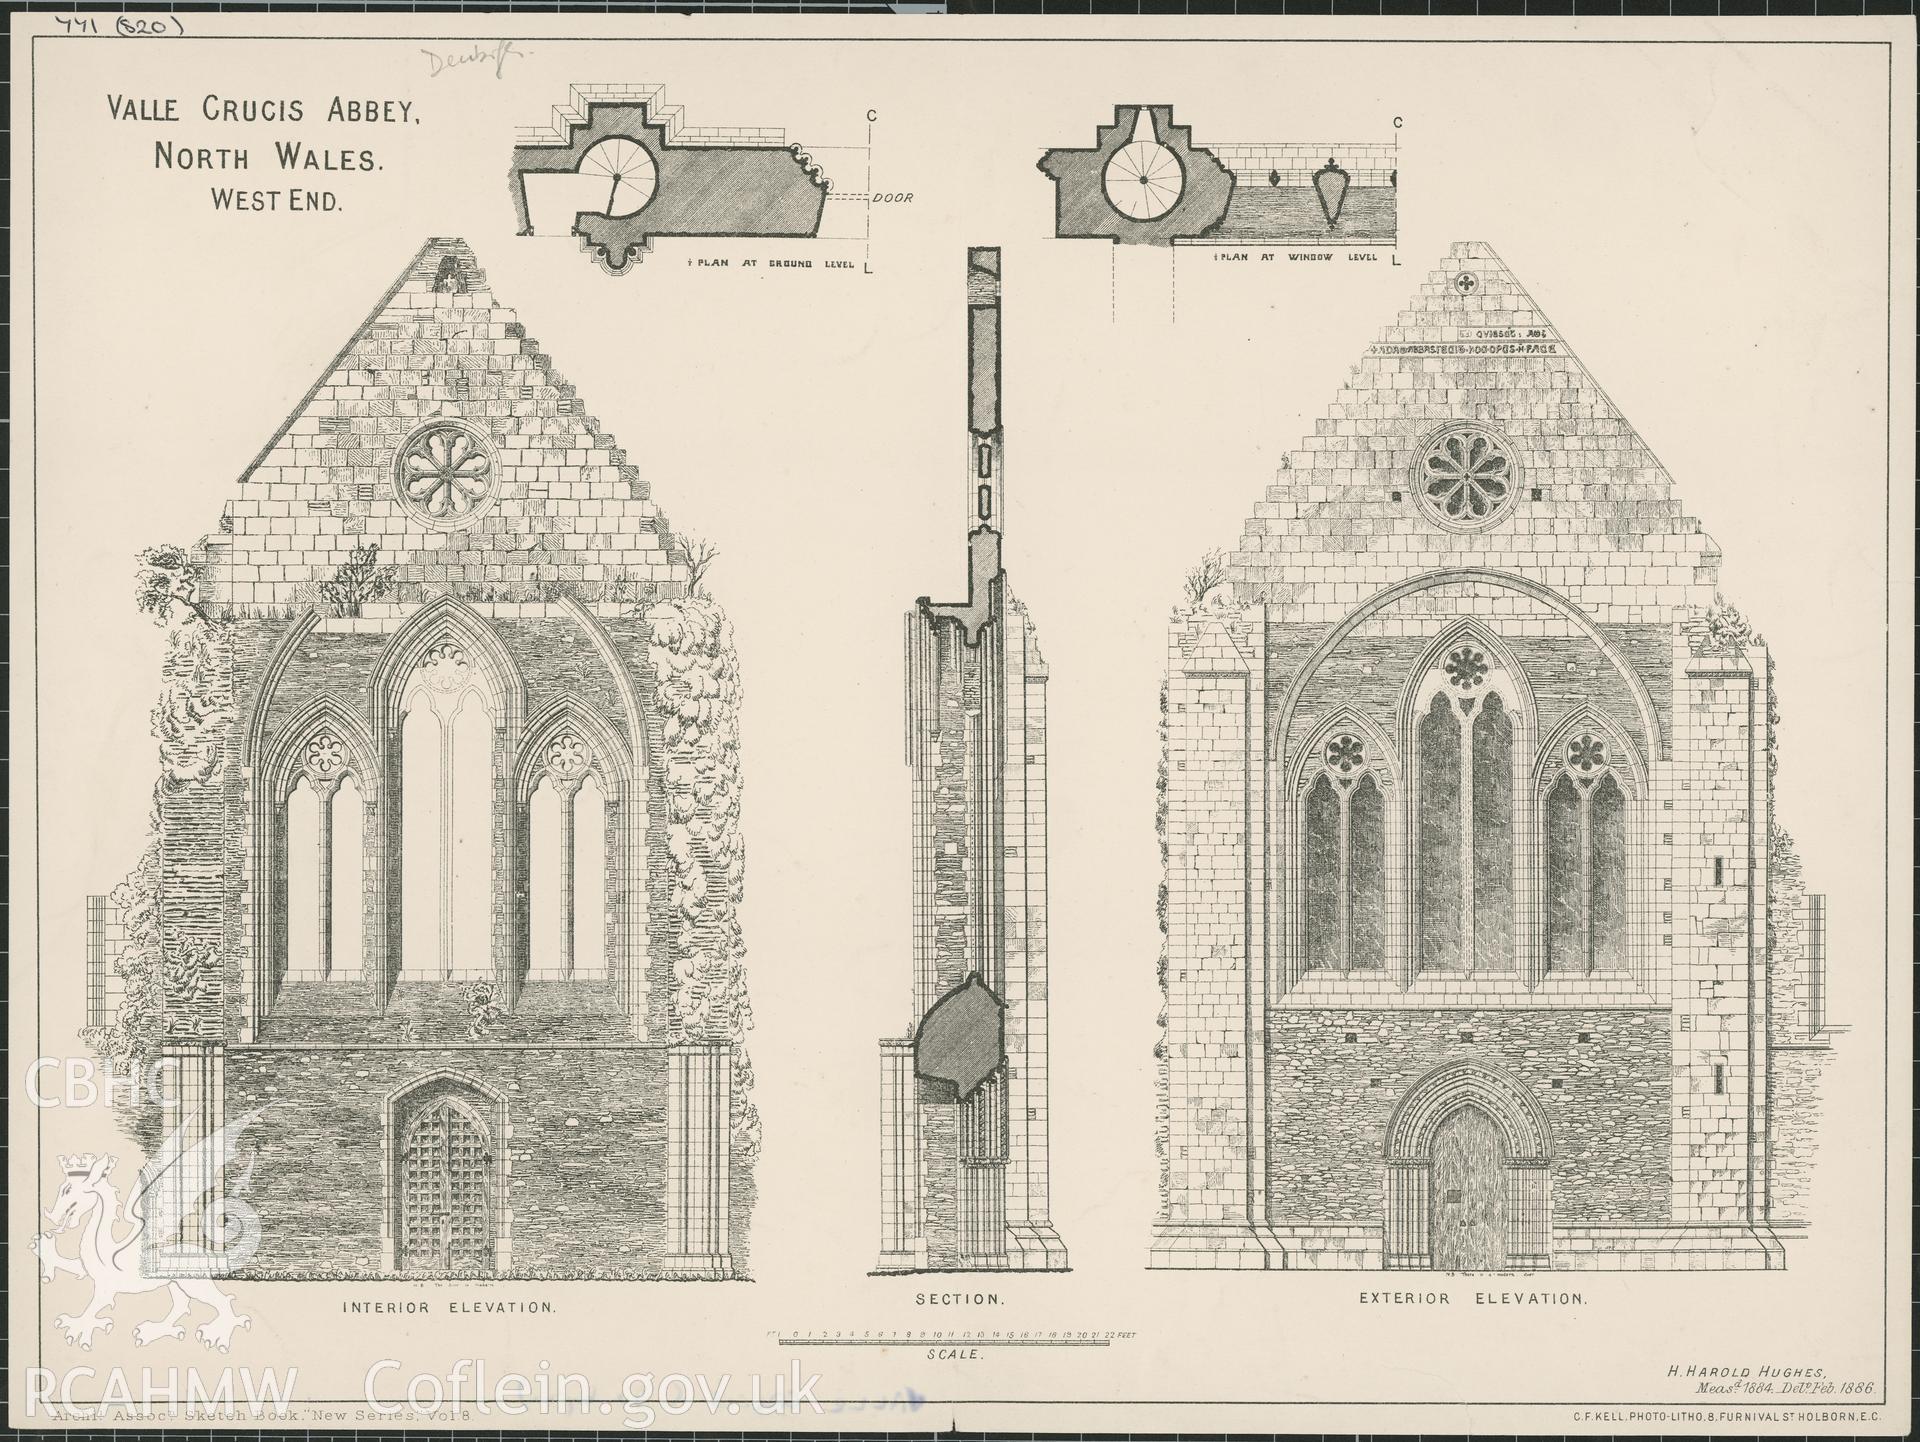 Digitised copy of a non RCAHMW drawing showing elevation, section and detail at Valle Crucis Abbey.